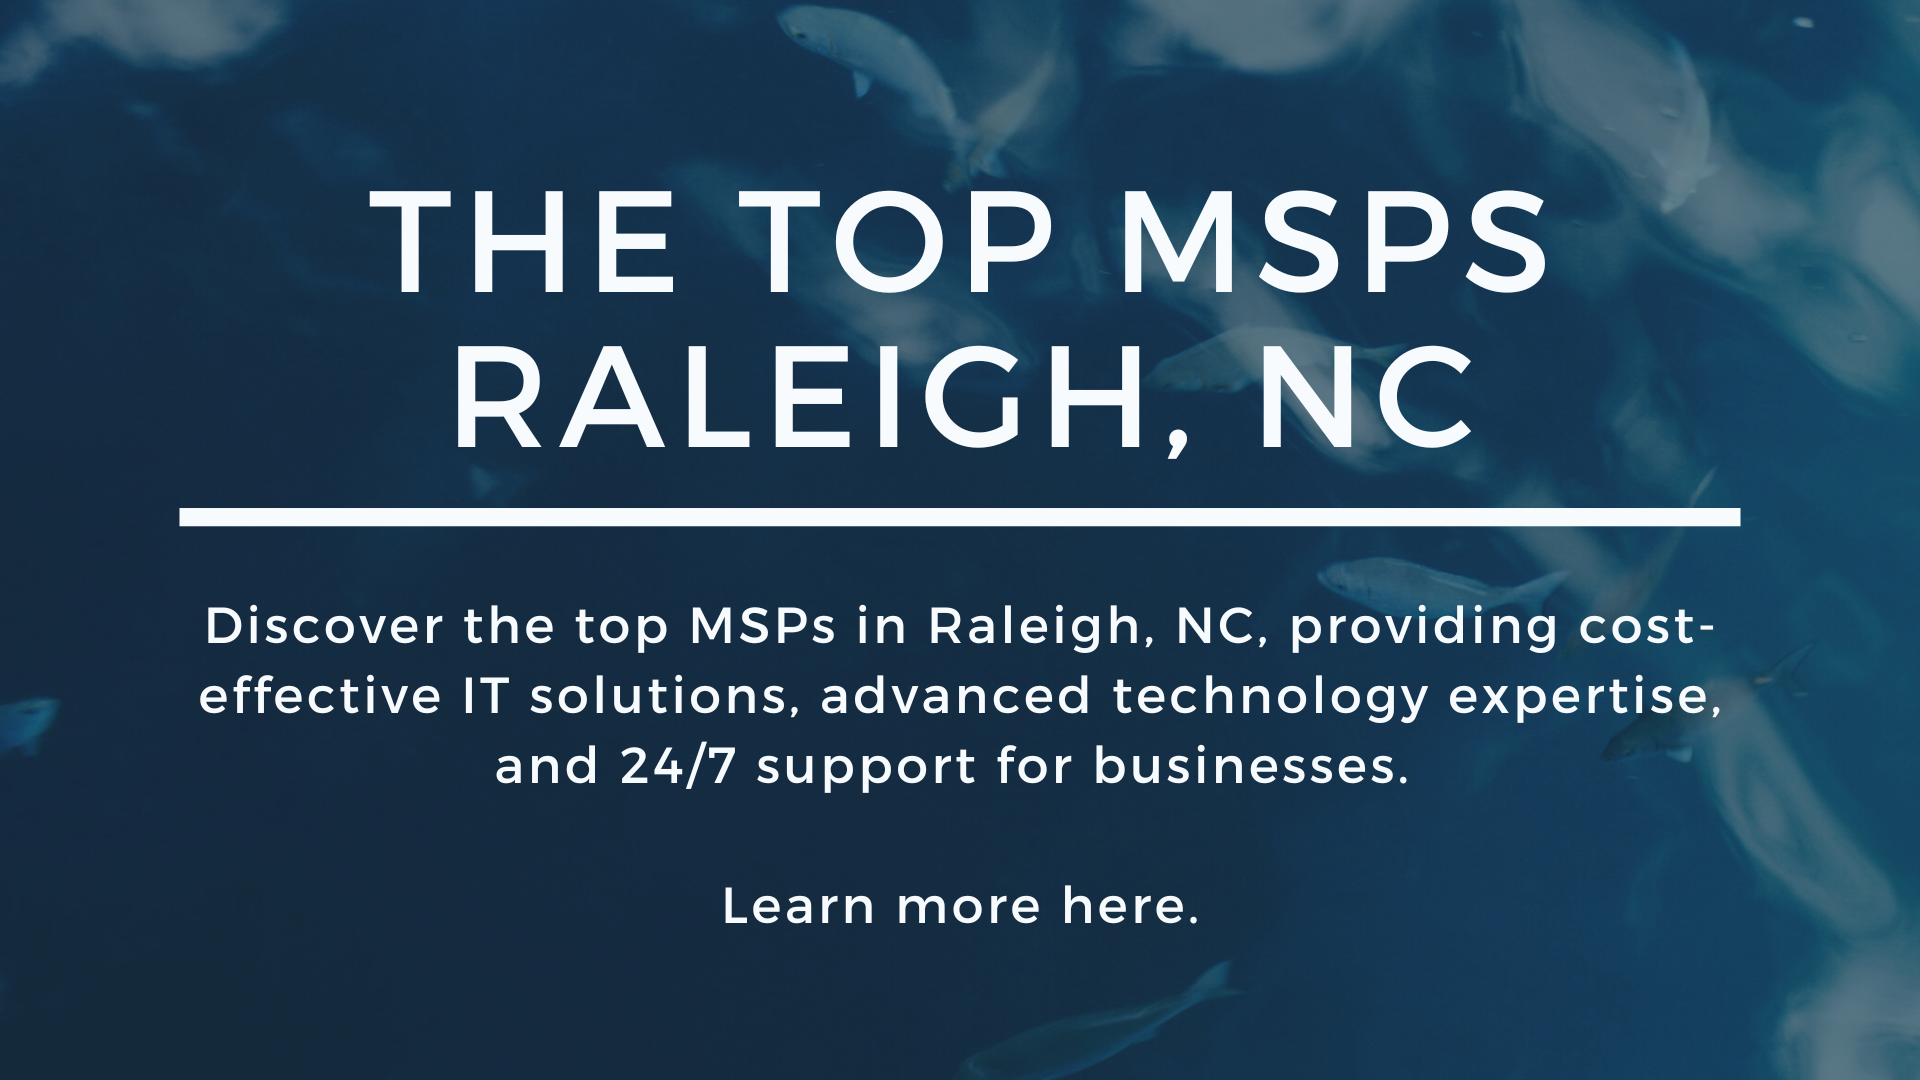 Top MSPs in Raleigh: Providing Advanced Technology Expertise and Proactive Support for Businesses